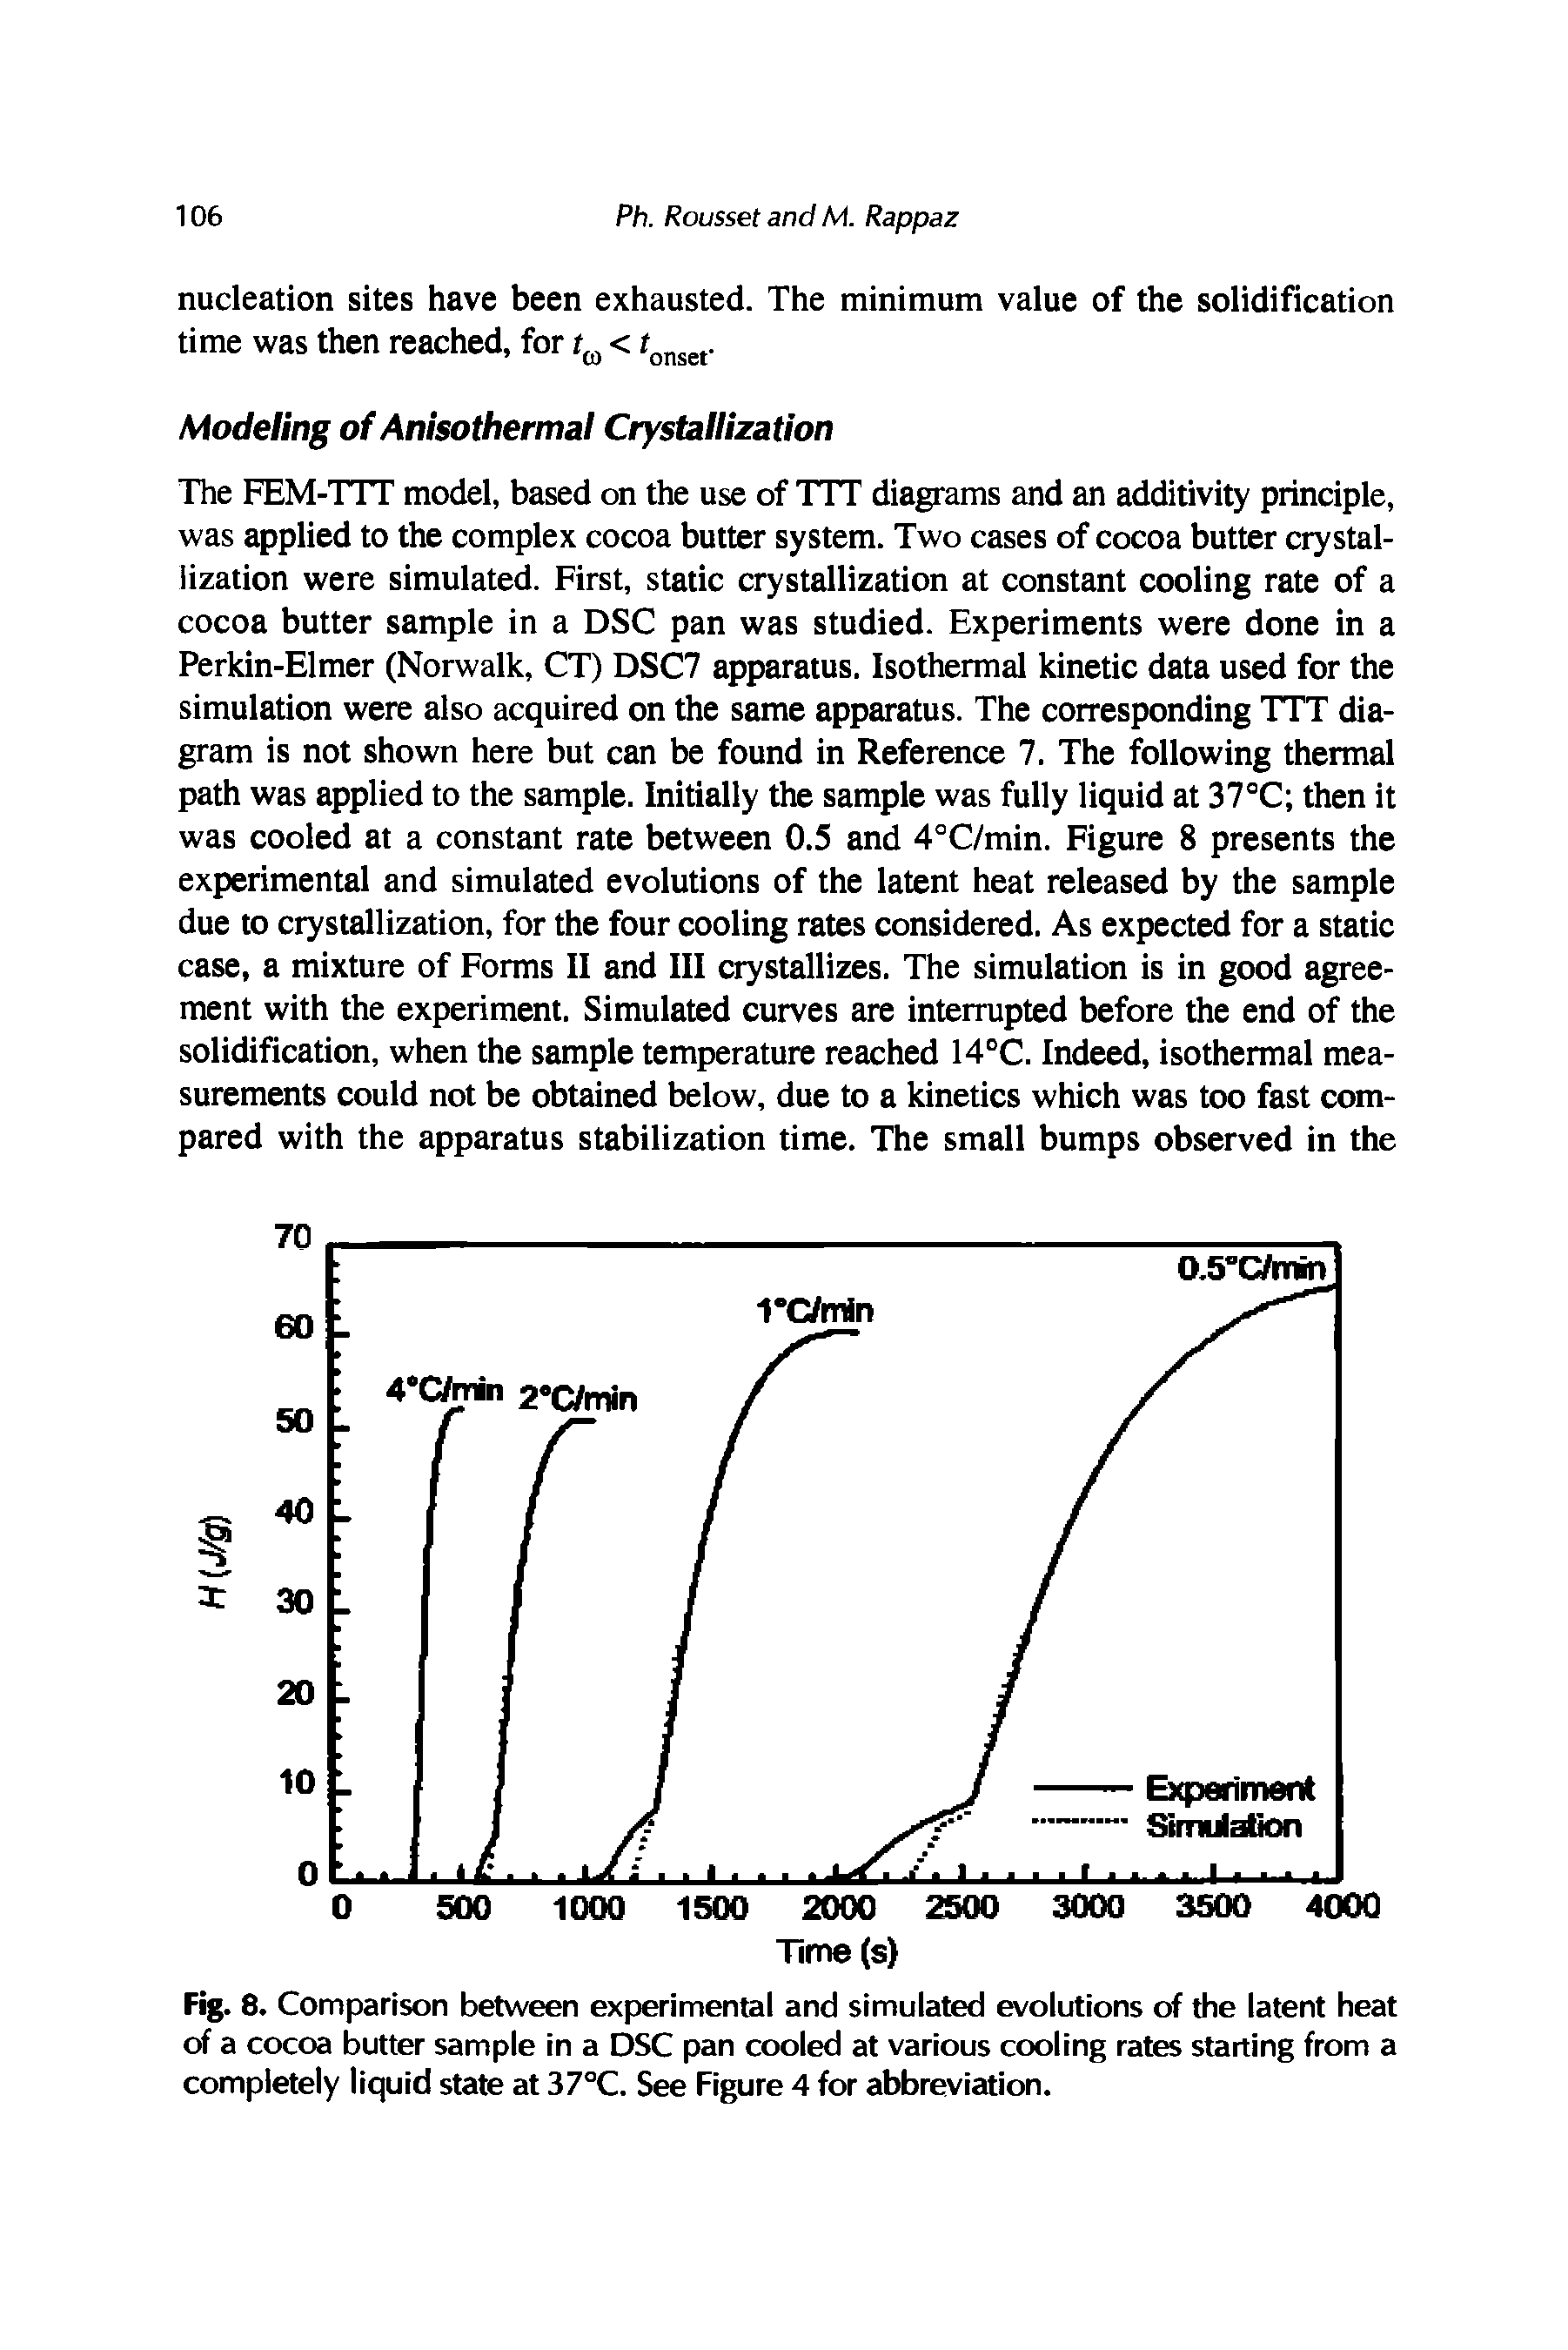 Fig. 8. Comparison between experimental and simulated evolutions of the latent heat of a cocoa butter sample in a DSC pan cooled at various cooling rates starting from a completely liquid state at 37°C. See Figure 4 for abbreviation.